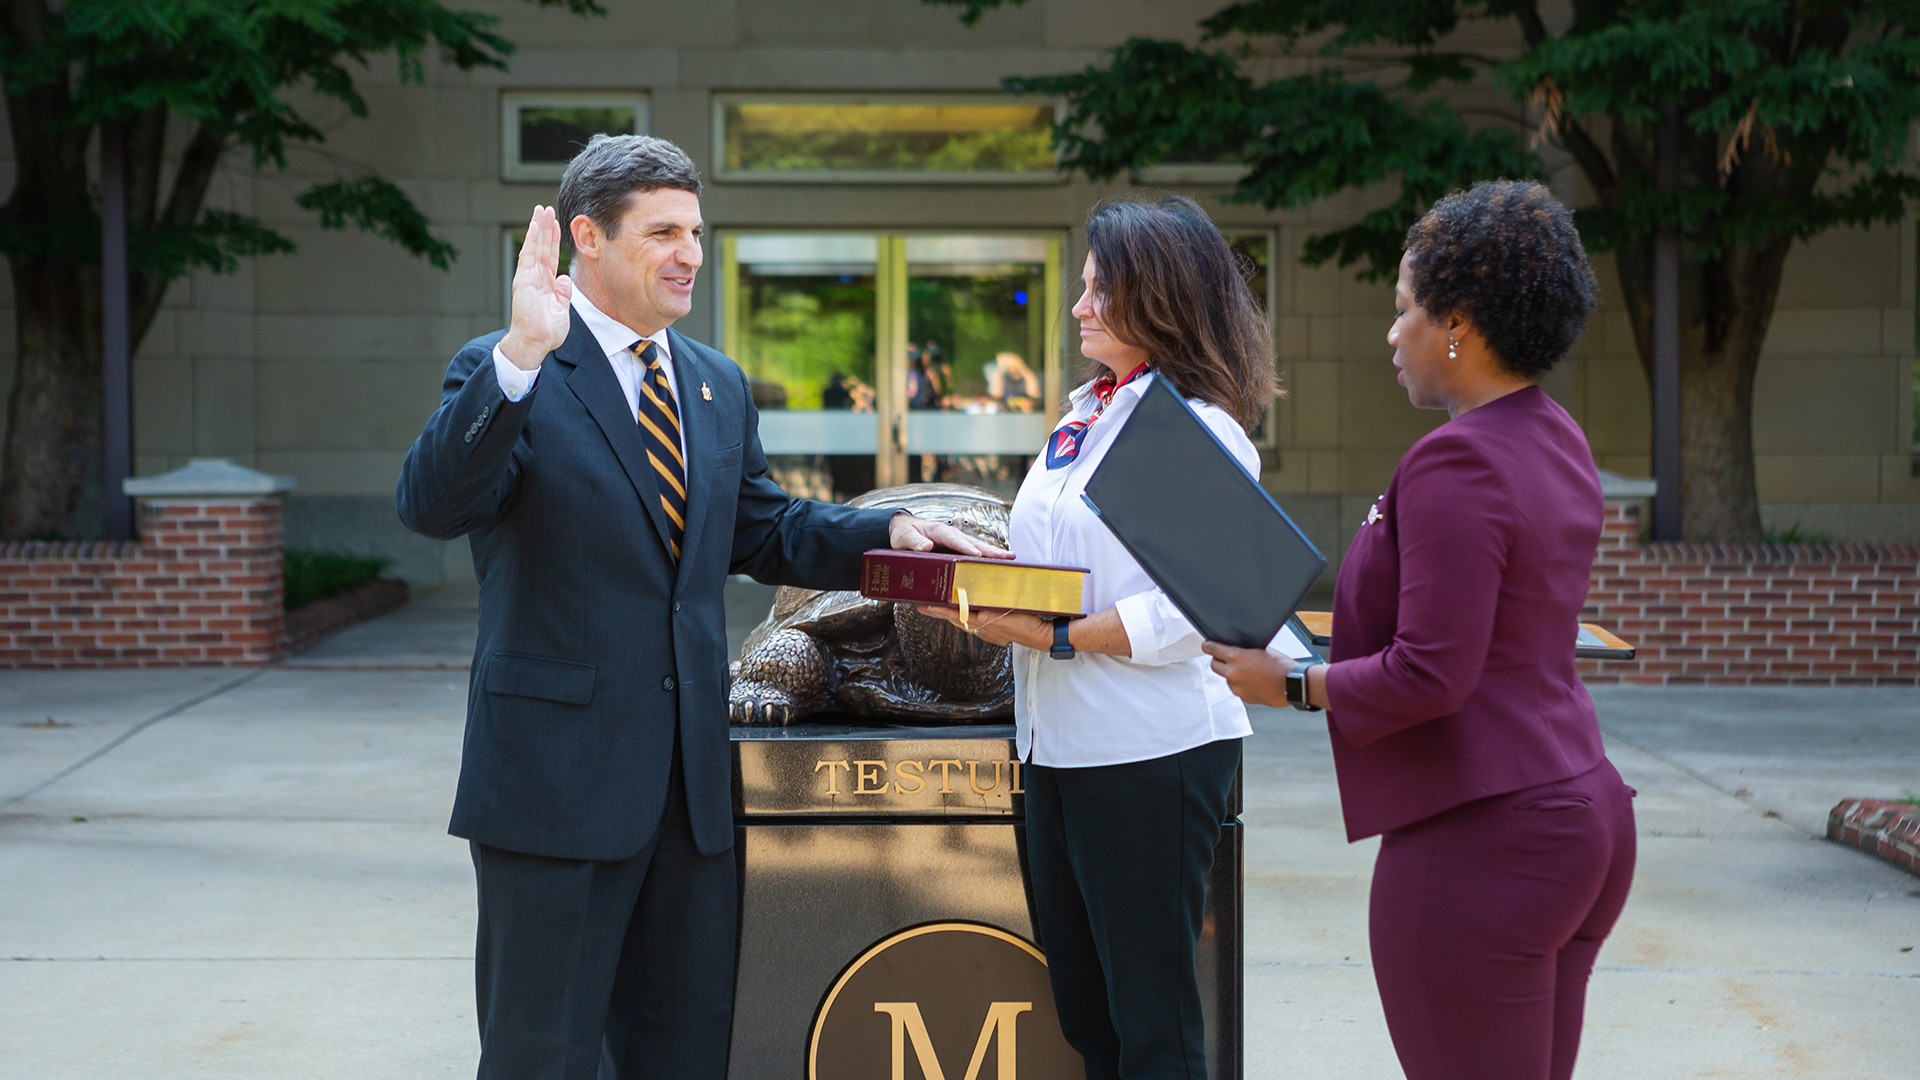 Former Maryland Senator Doug Peters ’85 was sworn in as the newest member of the University of Maryland Board of Regents.